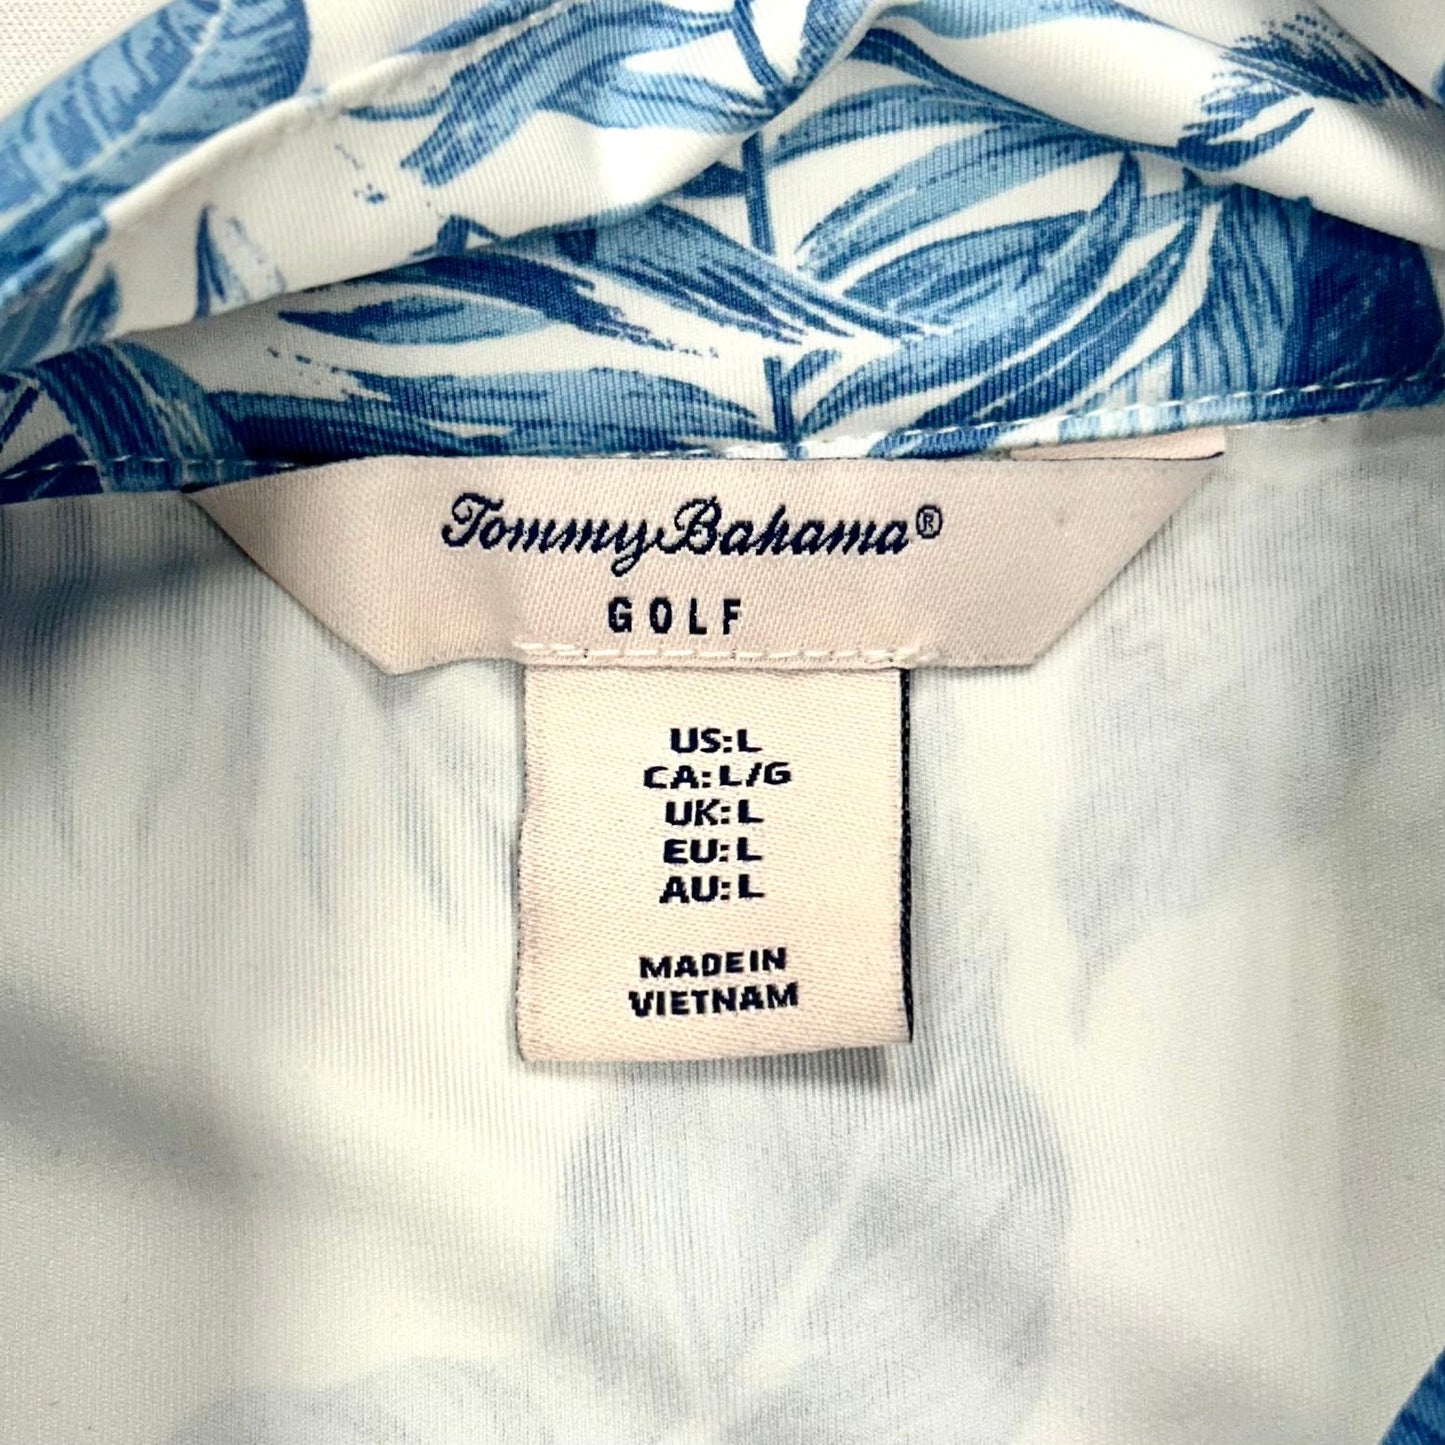 Blue & White Athletic Top Long Sleeve Collar By Tommy Bahama, Size: L